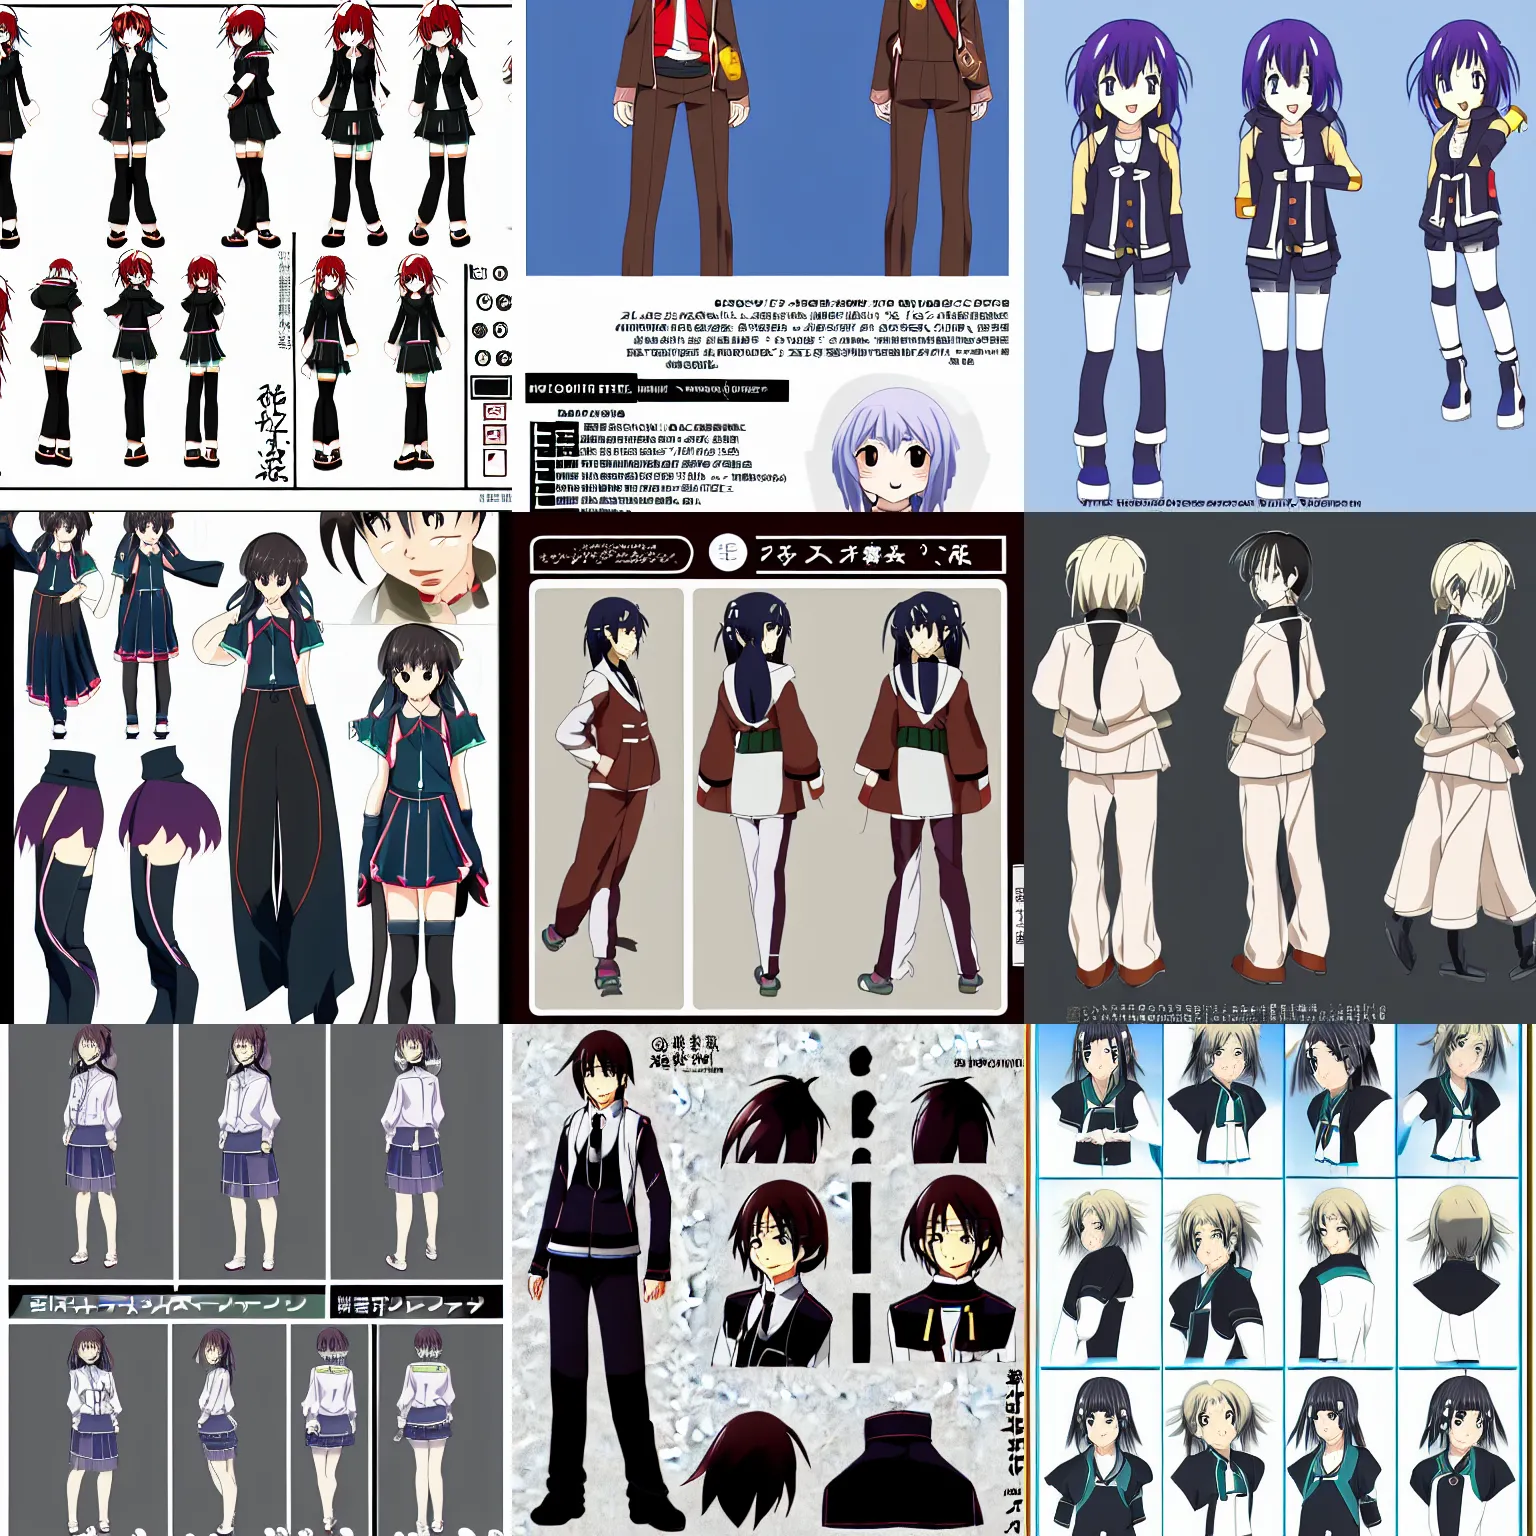 Twitter 上的DavidAnime character reference sheets vs western animation  character reference sheets httpstcoVbNmtvkNN8  Twitter